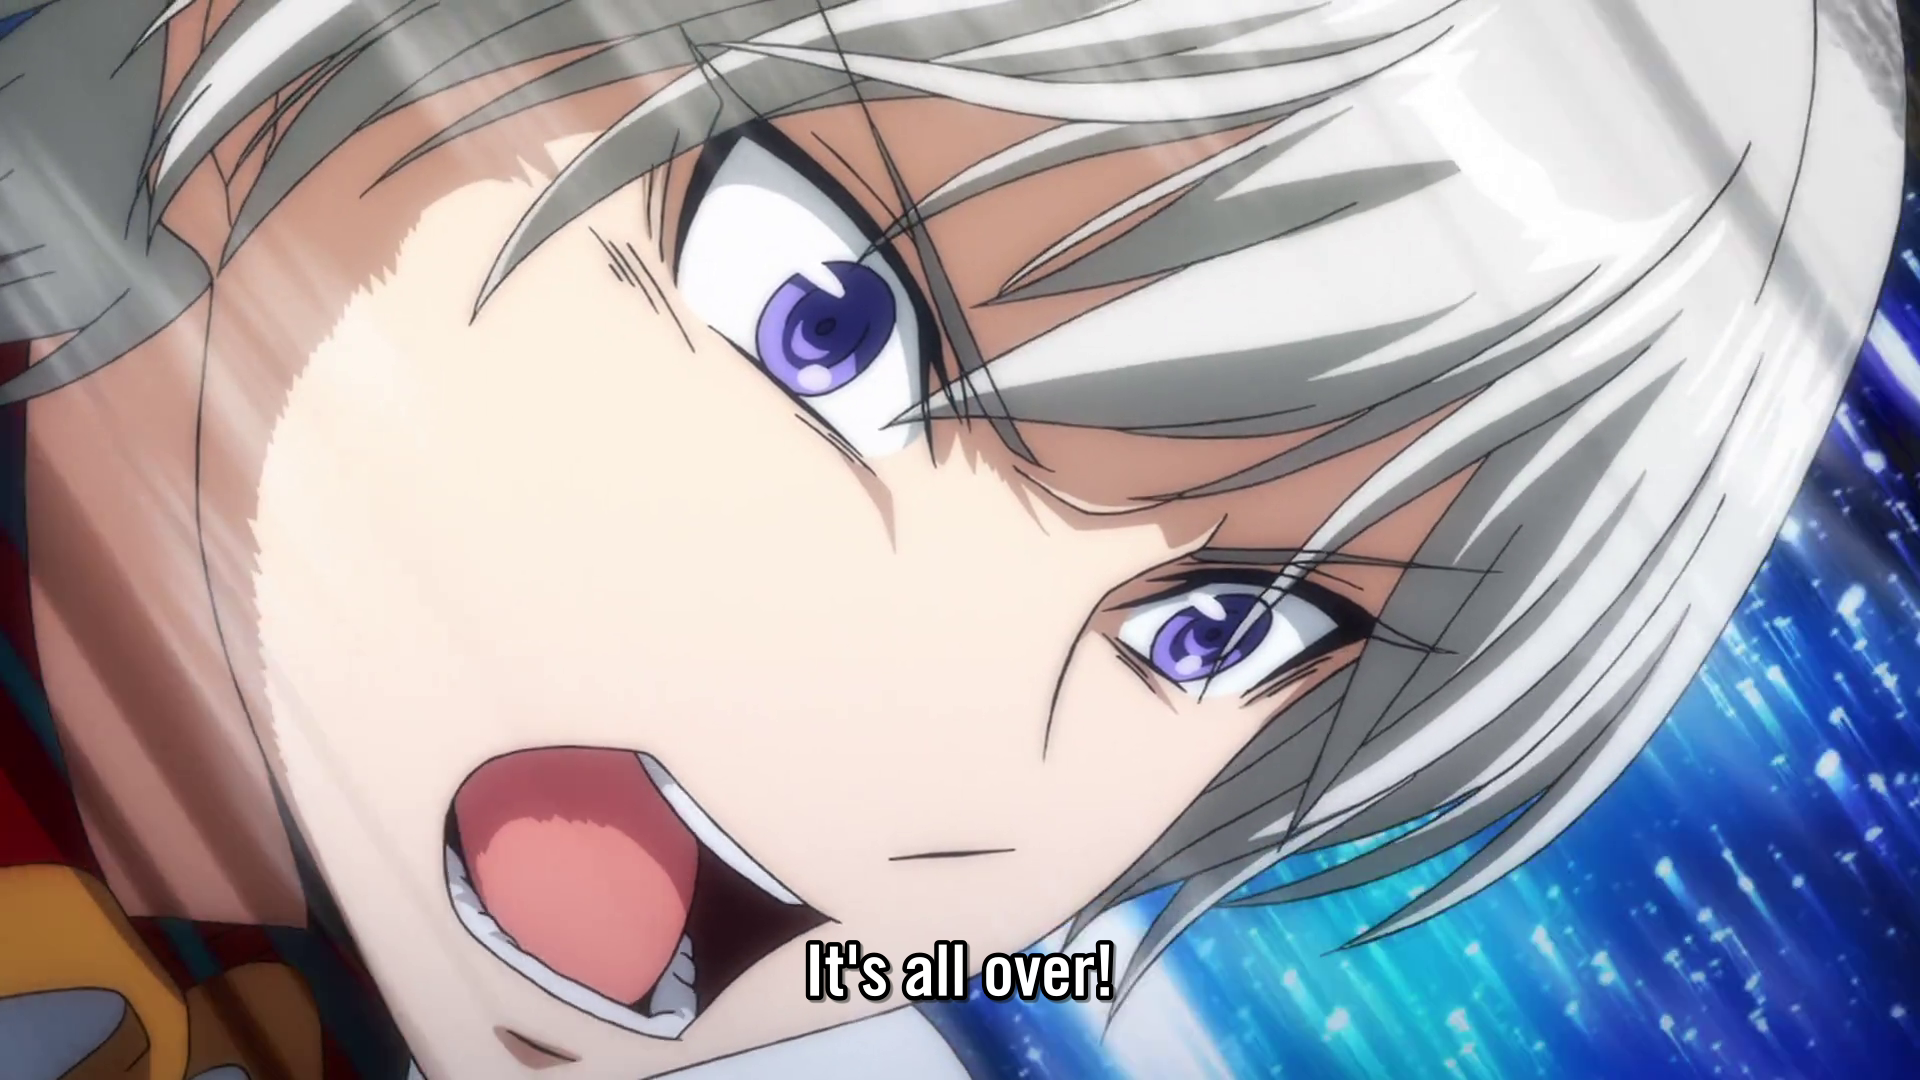 Valvrave the Liberator Second Season Sadness is Like the Falling